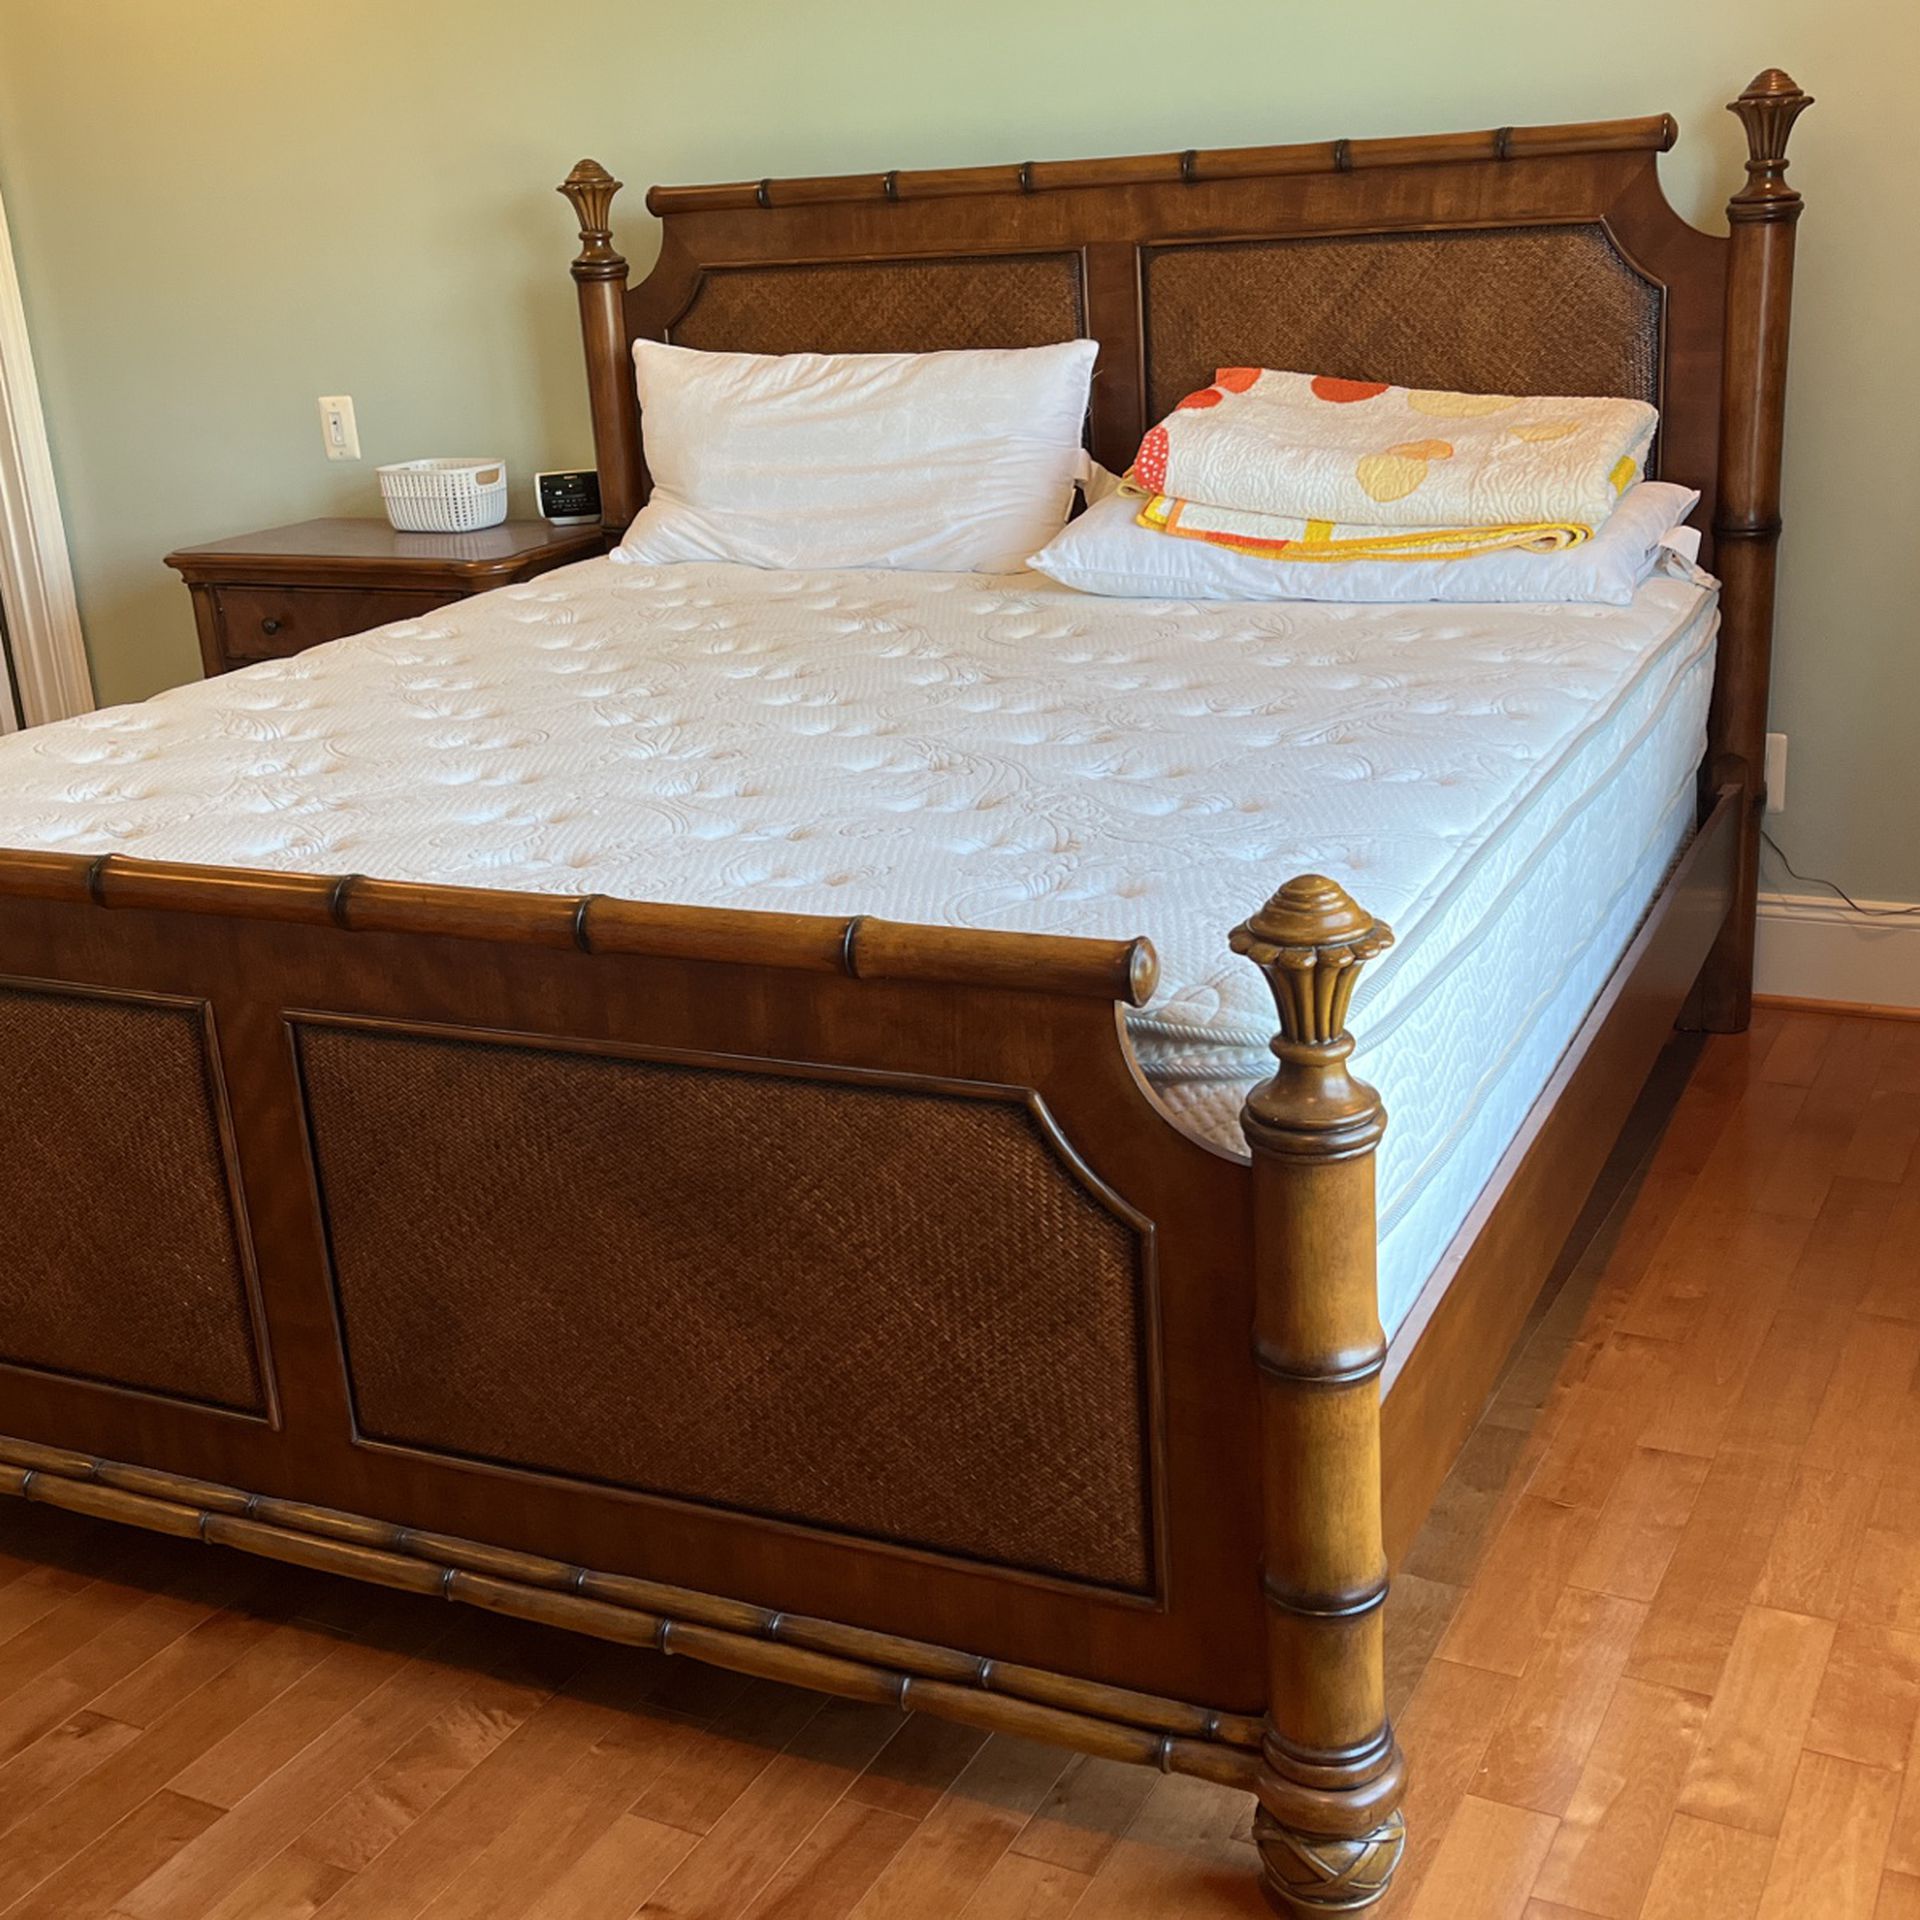 King Bed Set - Bed, Nightstand, Chest, Dresser And Mirror